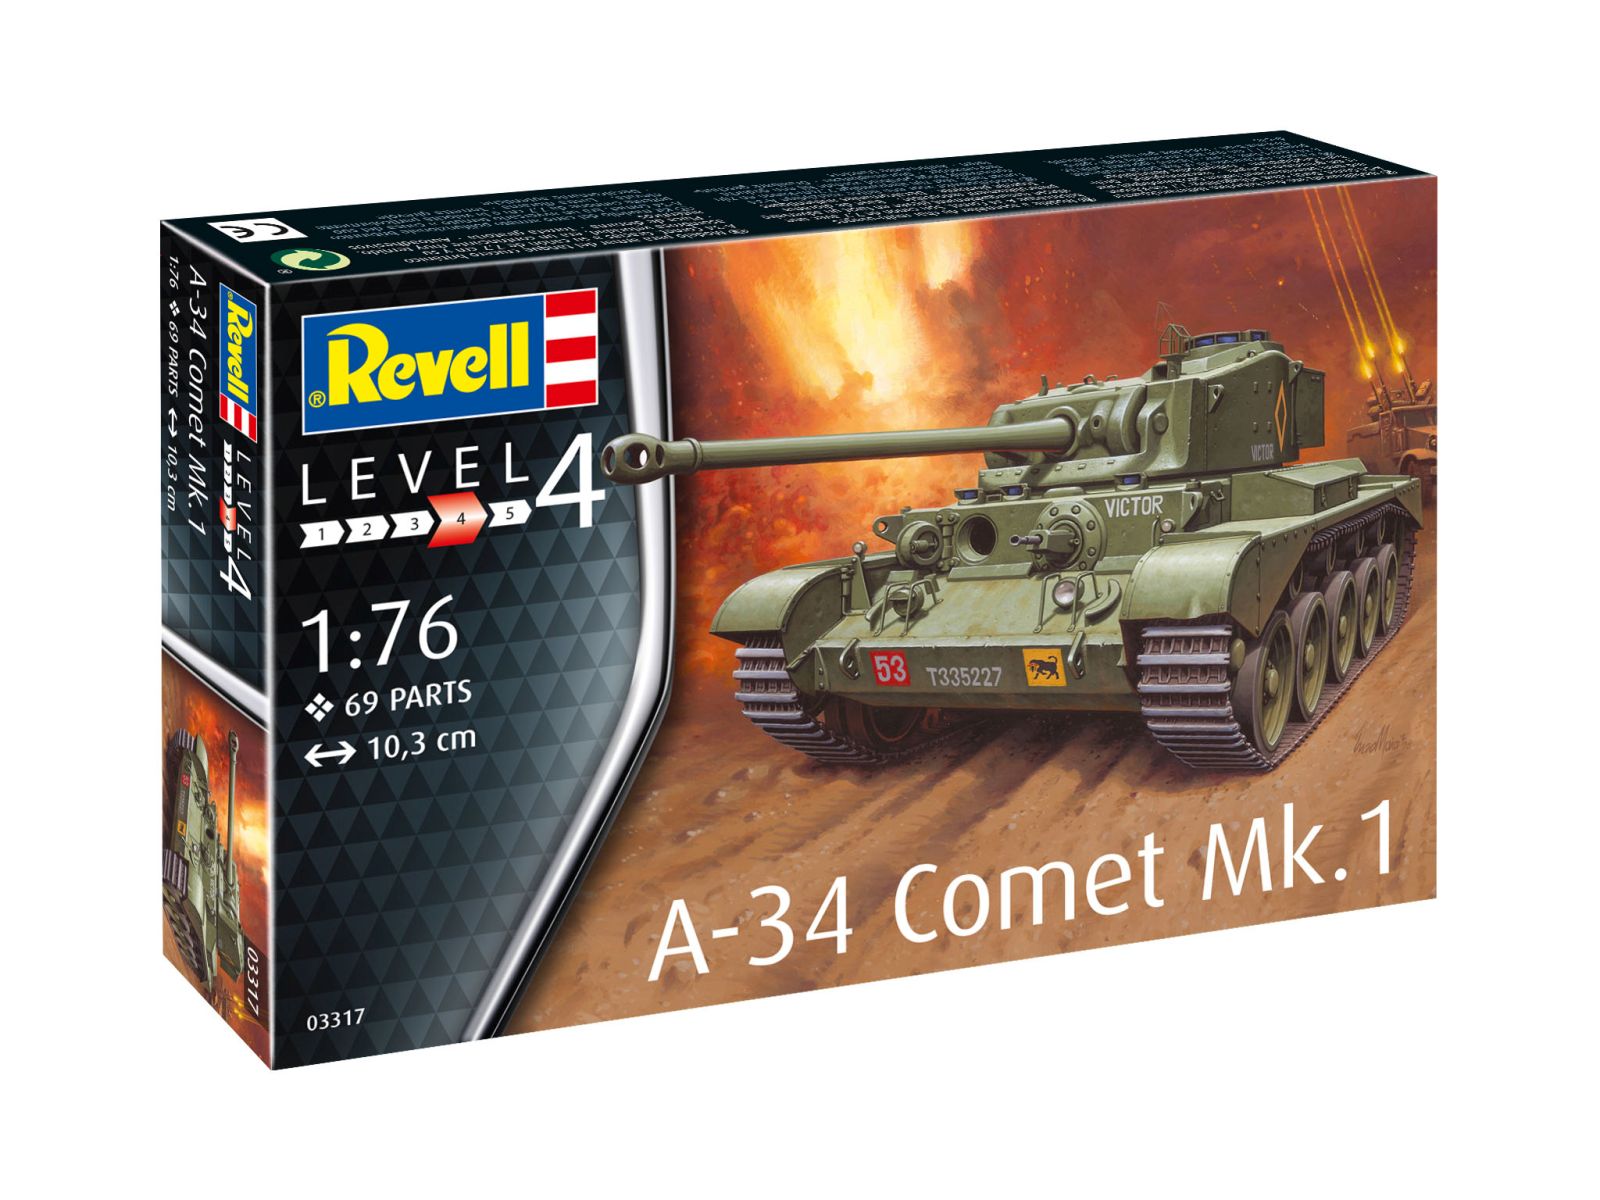 Revell 03317 - A-34 Comet Mk.1